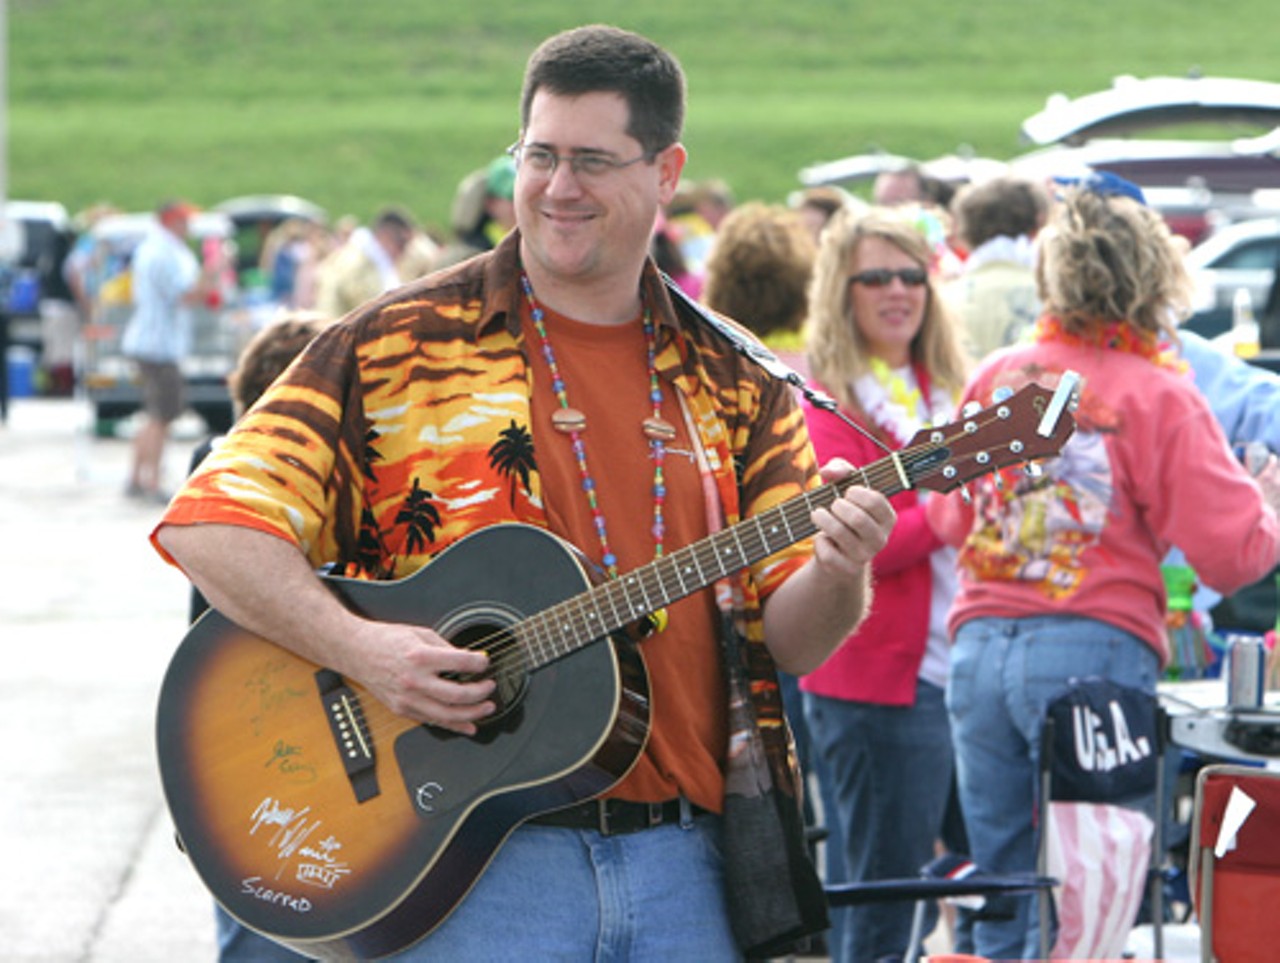 Eric Groos of Camdenton strums to Jimmy Buffett tunes prior to the concert.